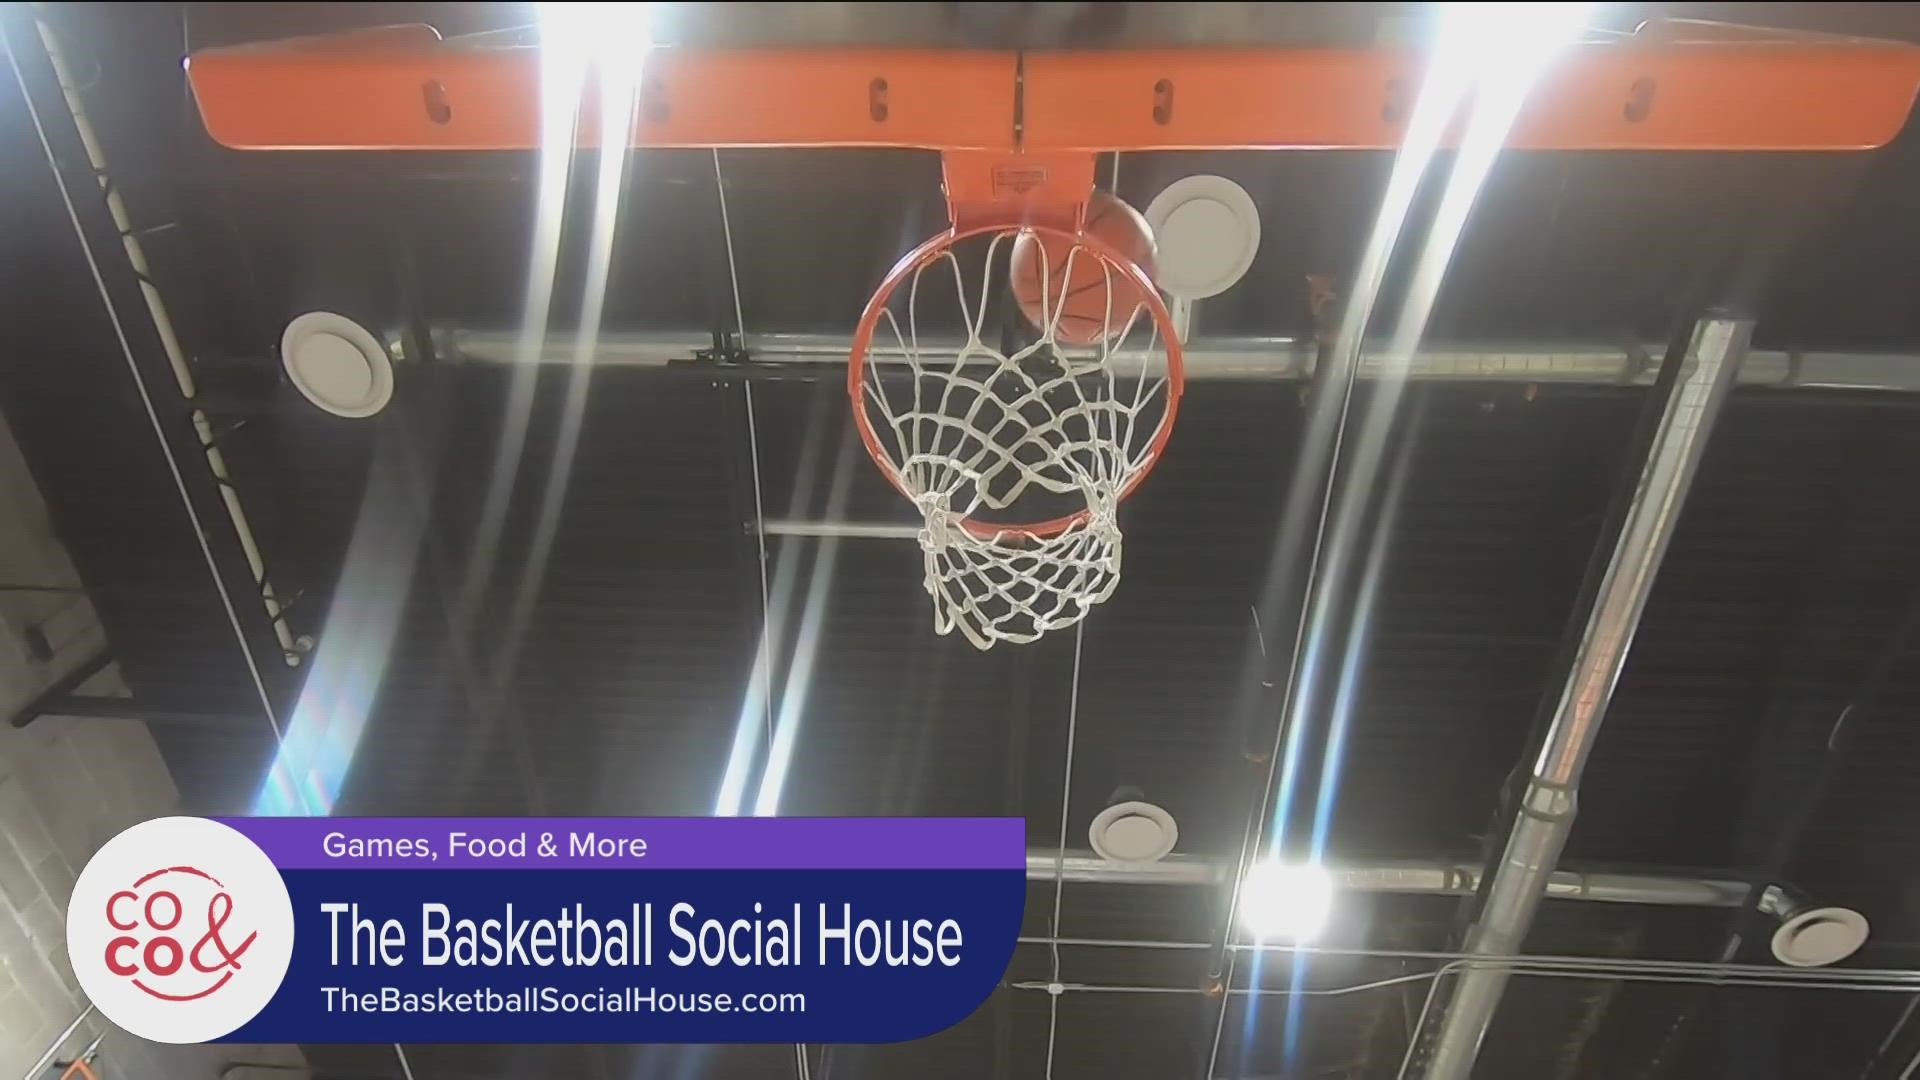 Check out the Basketball Social House for team bonding, joining a league, or just to hang out and ball! Visit TheBasketballSocialHouse.com.